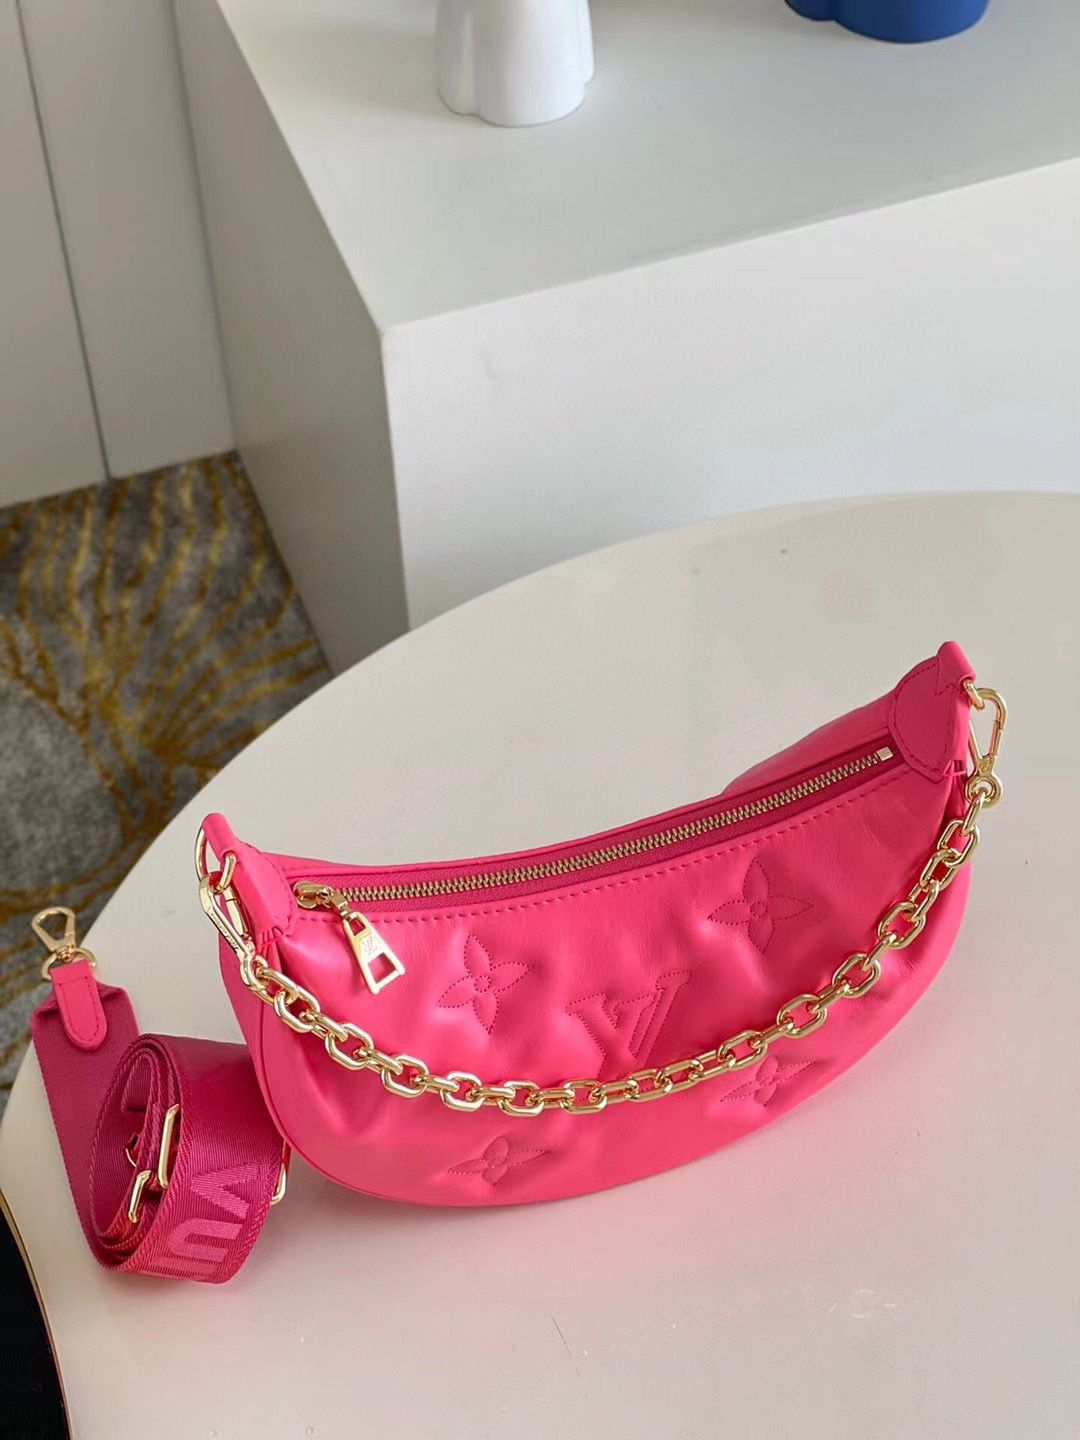 Louis Vuitton Twist Bag for Sale in Port Washington, NY - OfferUp